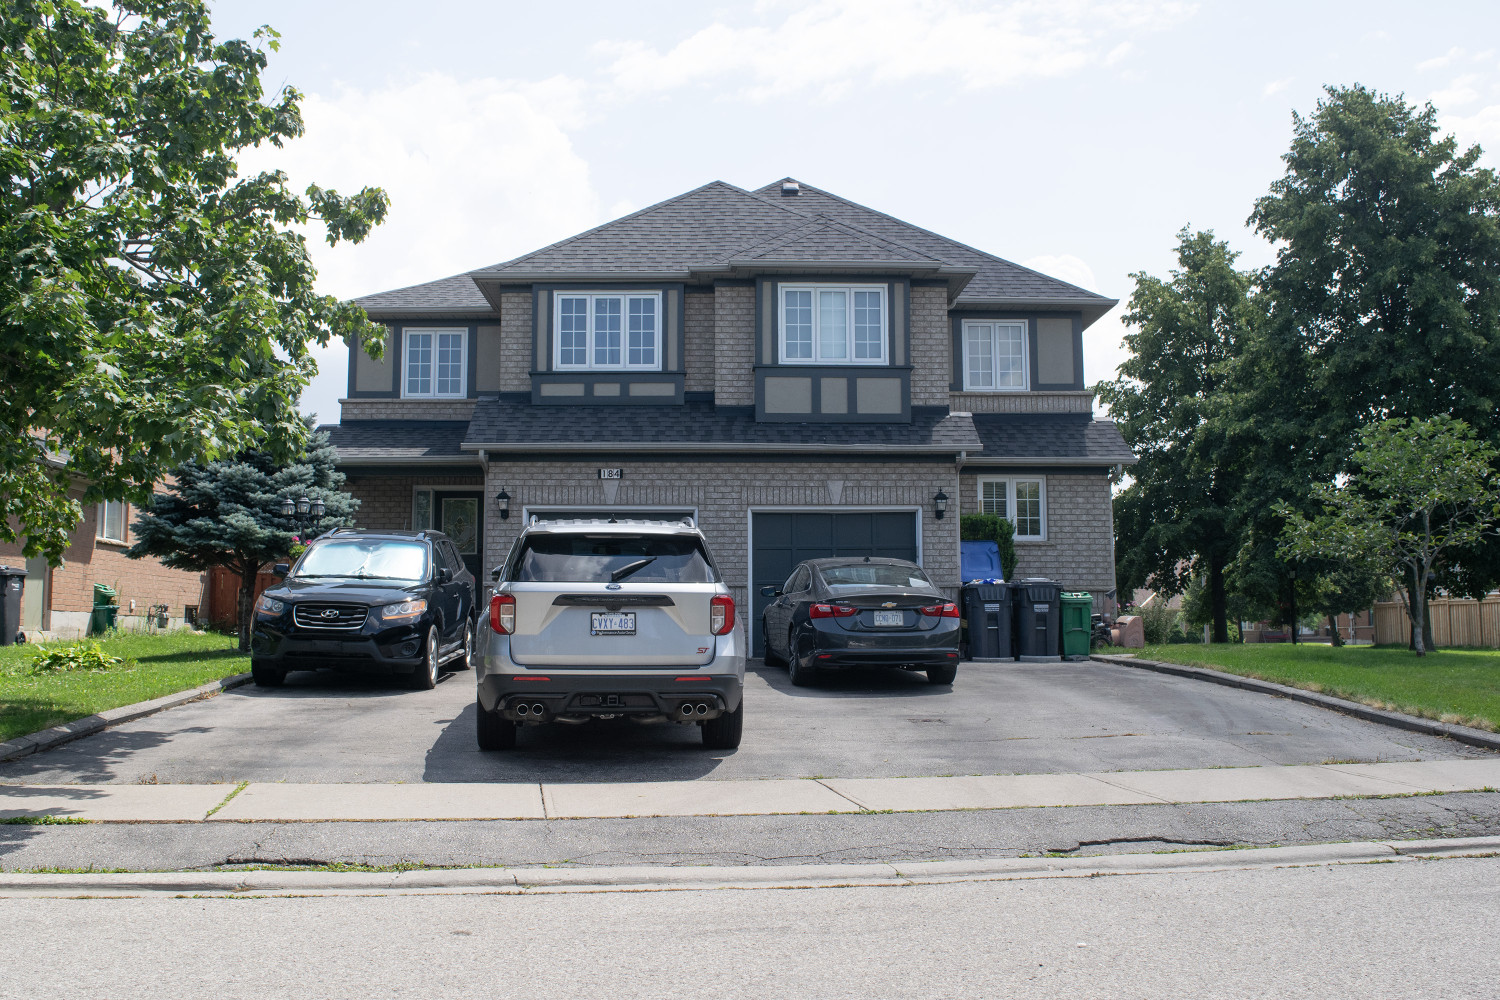 Driveways: the nexus of a demographic and environmental issue unique to Brampton